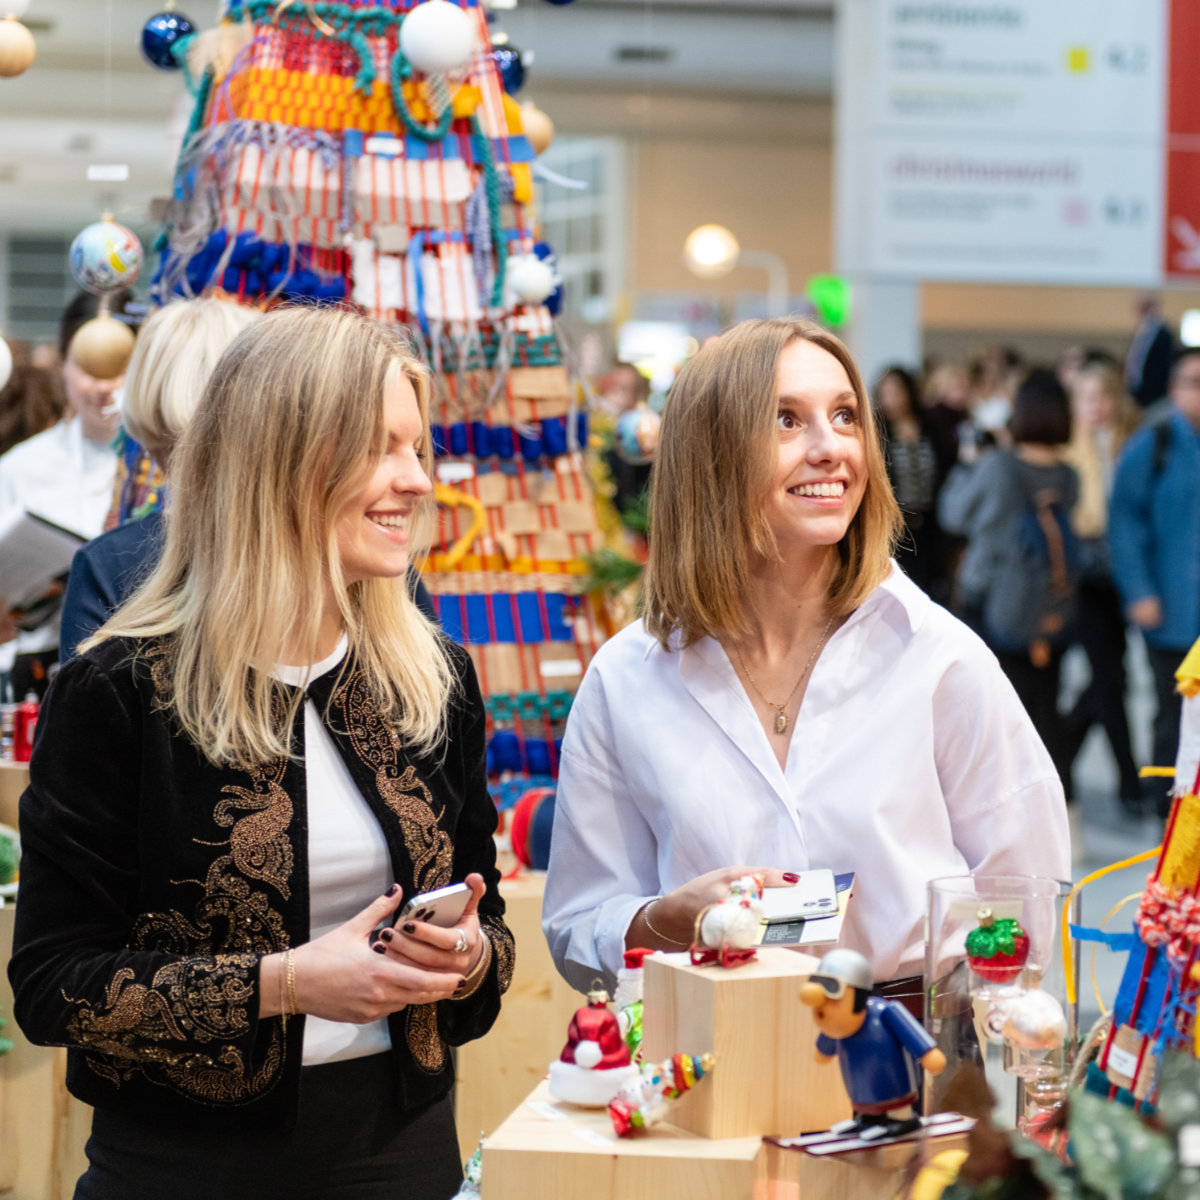 Visitors at Christmasworld - the leading international trade fair for seasonal decorations and festive decorations